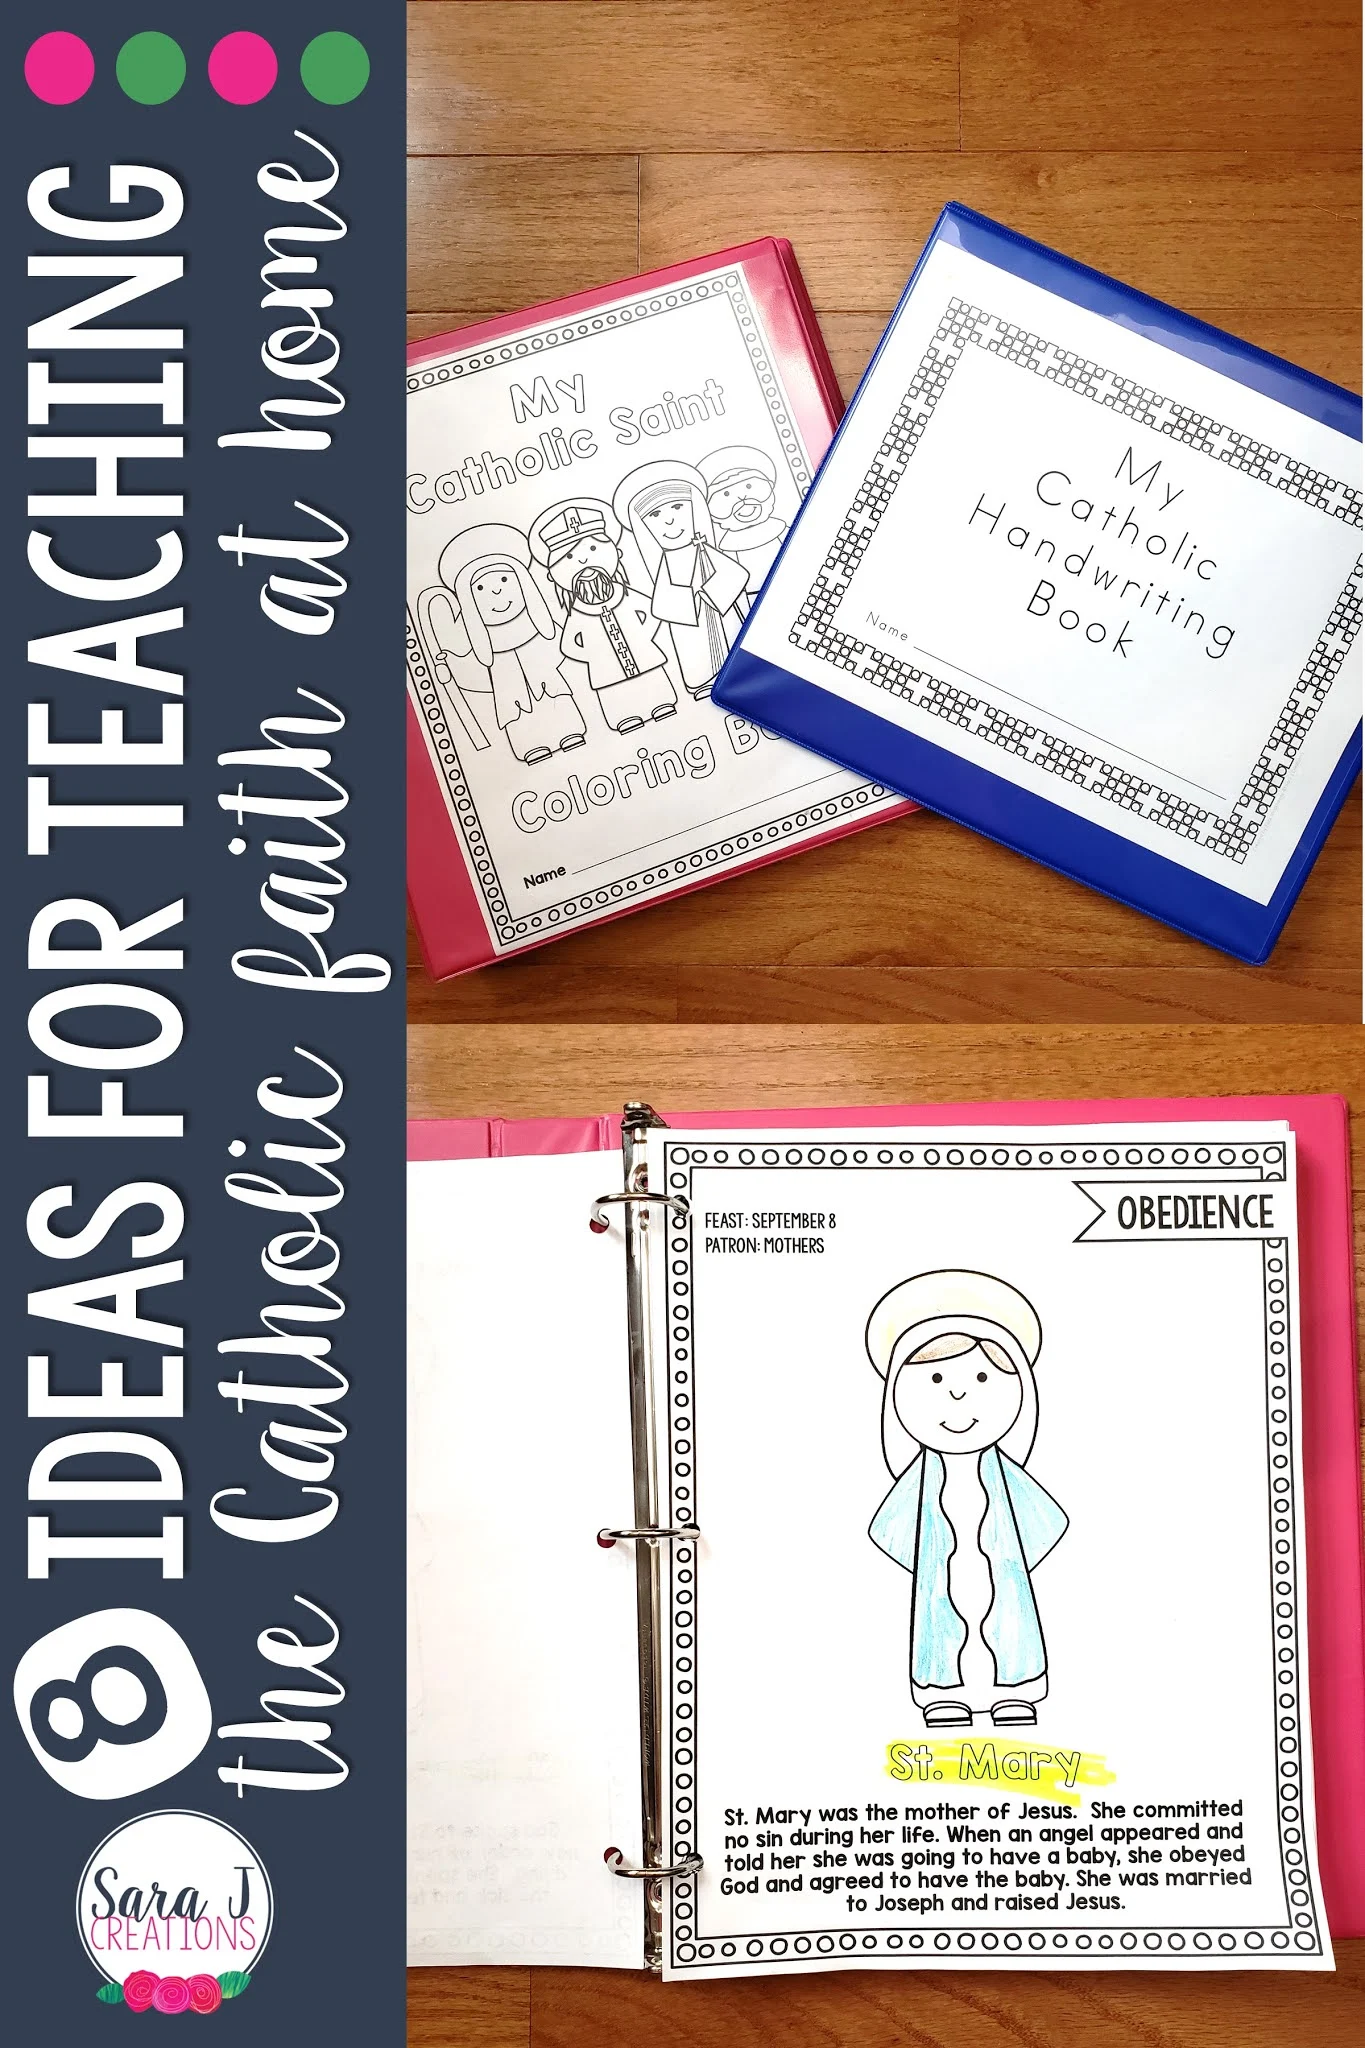 Simple ideas for incorporating the Catholic faith into your home. Perfect for homeschoolers and non homeschoolers alike.